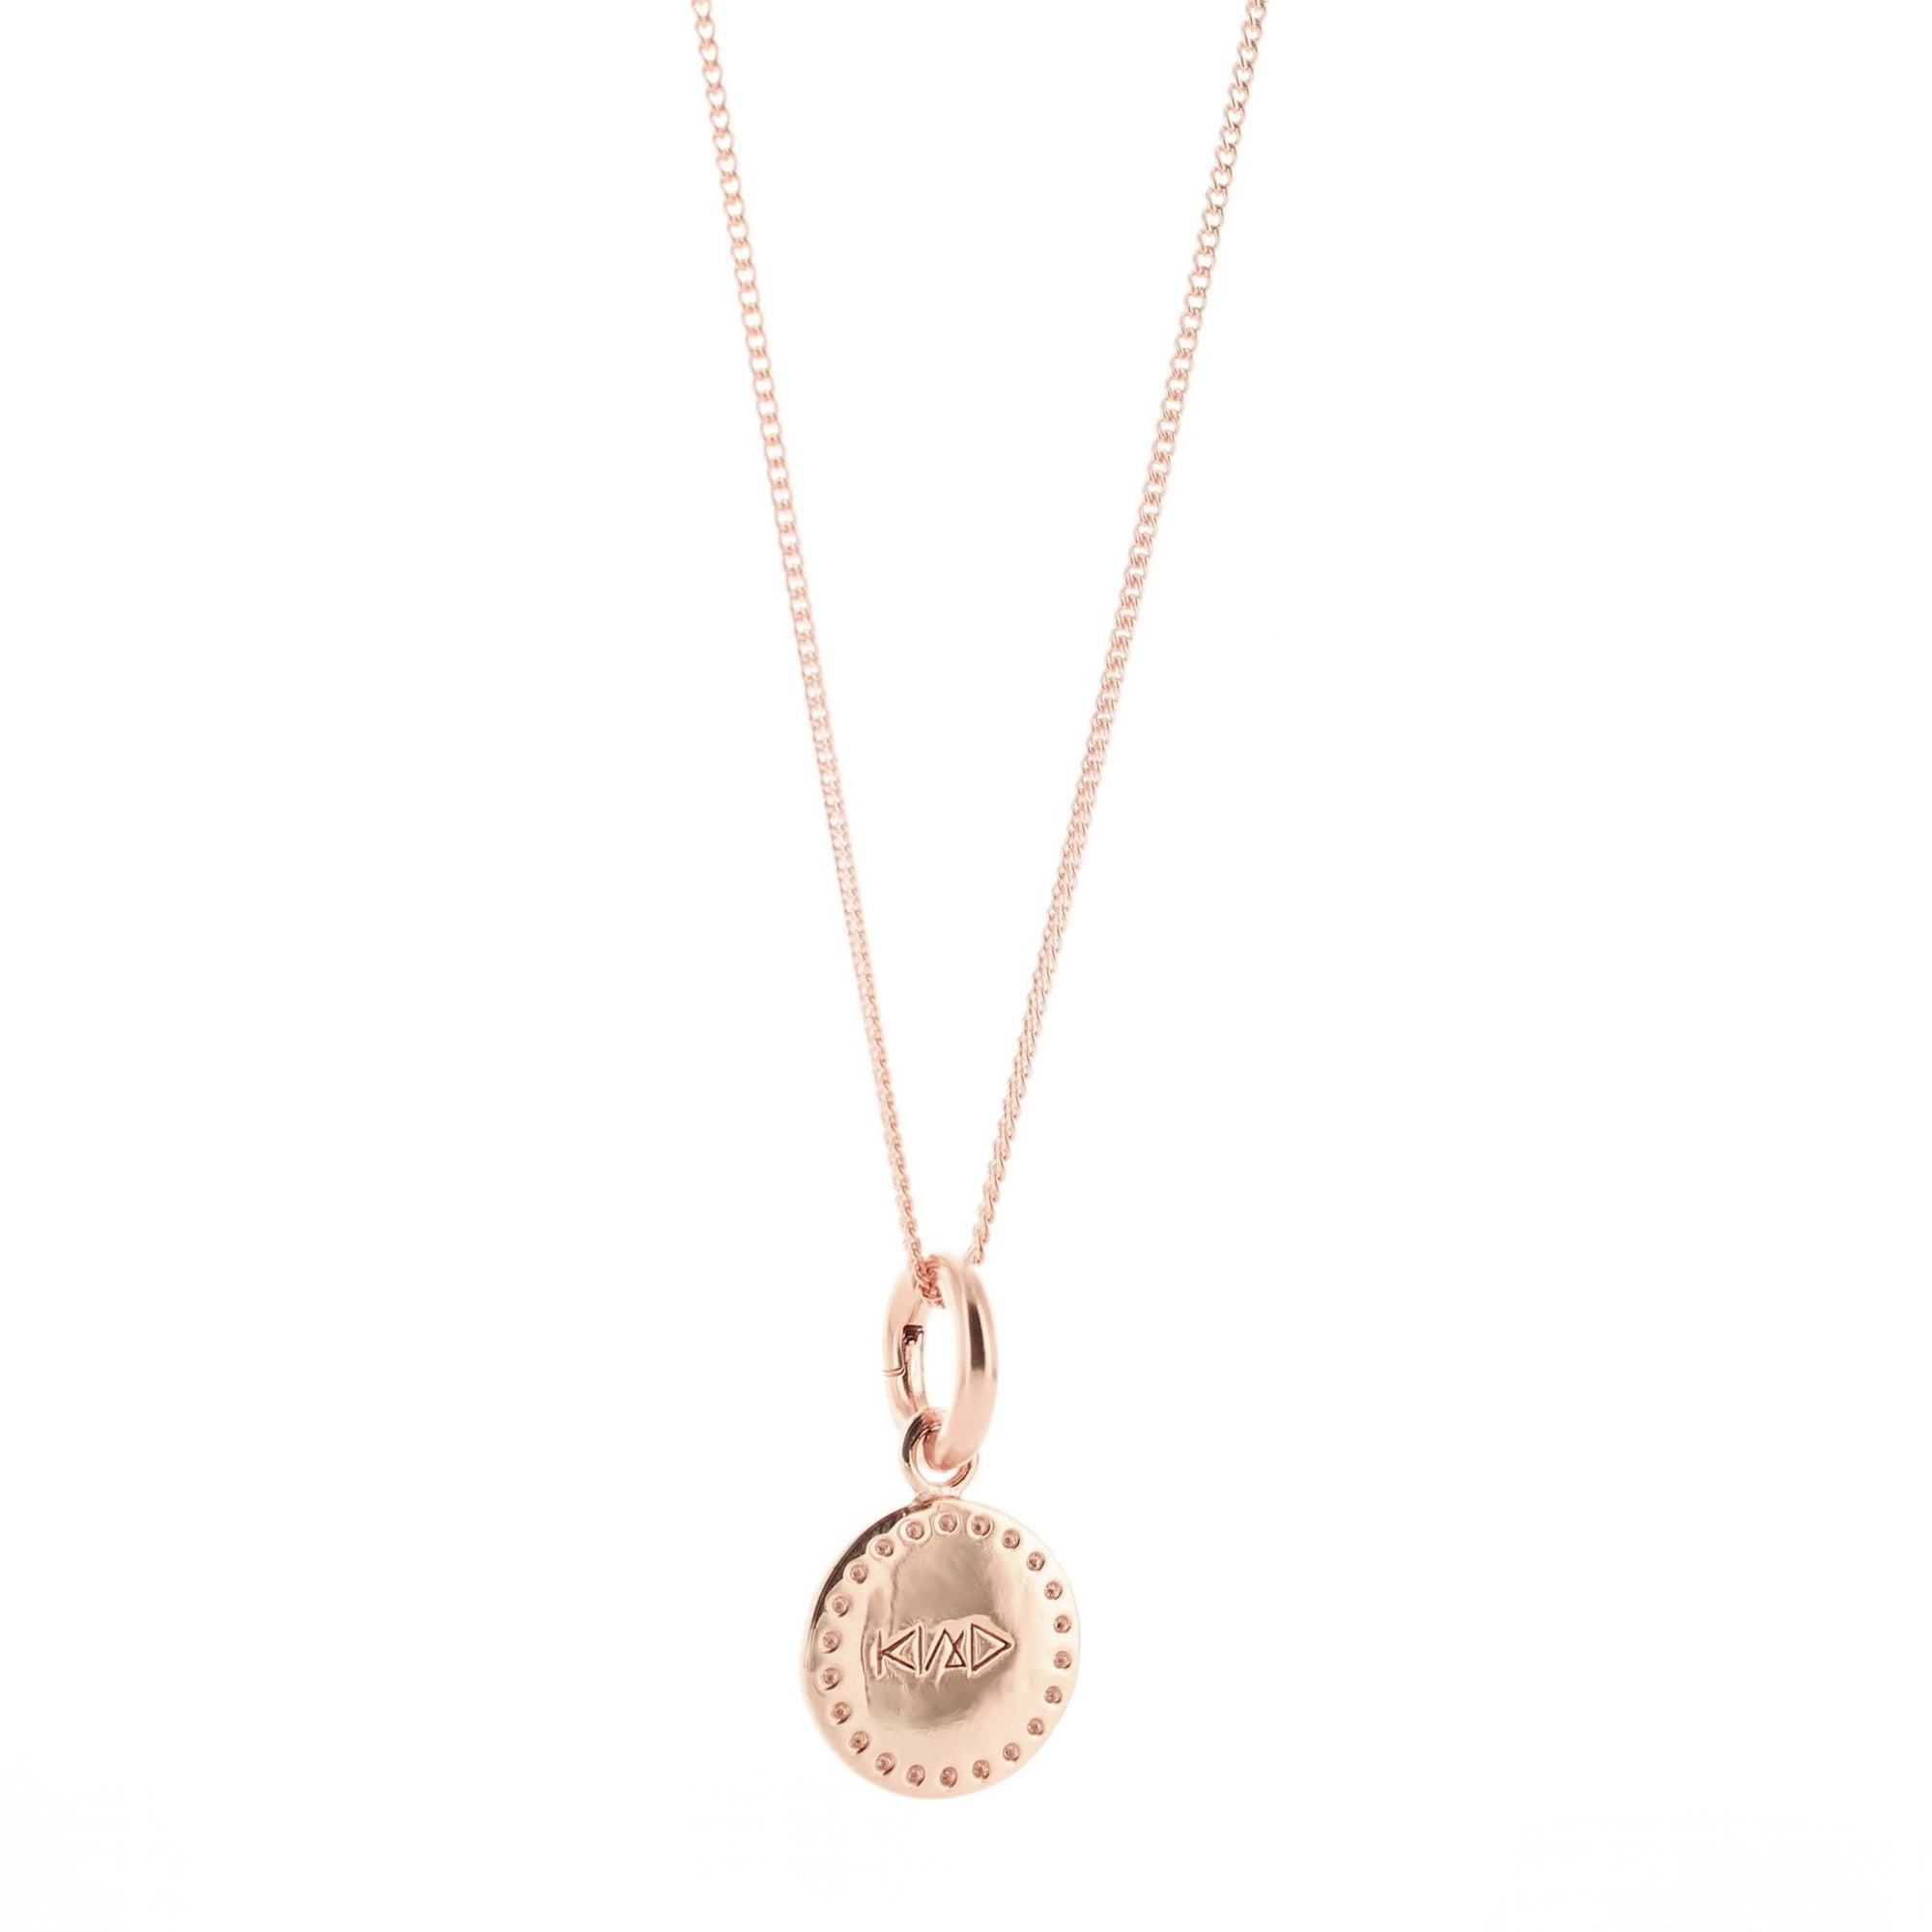 KIND FLOATING CHARM PENDANT ALL METAL ROSE GOLD - SO PRETTY CARA COTTER